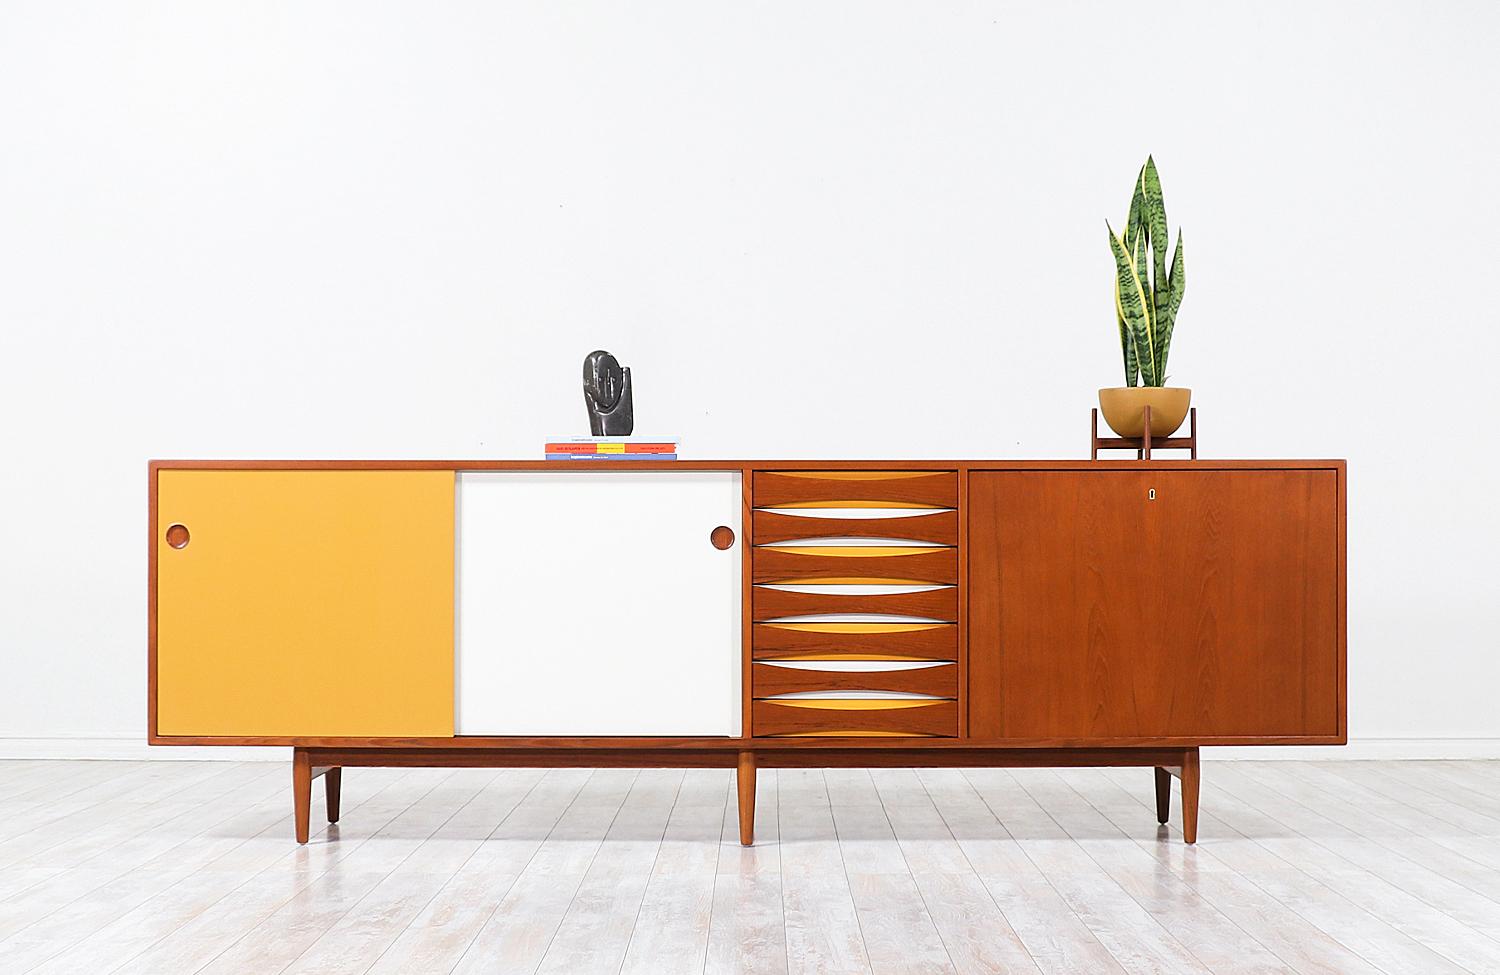 Danish modern teak credenza designed by Arne Vodder for Sibast Møbler in Denmark in 1959. This impressive model 29A credenza features a teak wood case with sliding doors and a shelved interior, seven drawers in the middle, and a pull-down